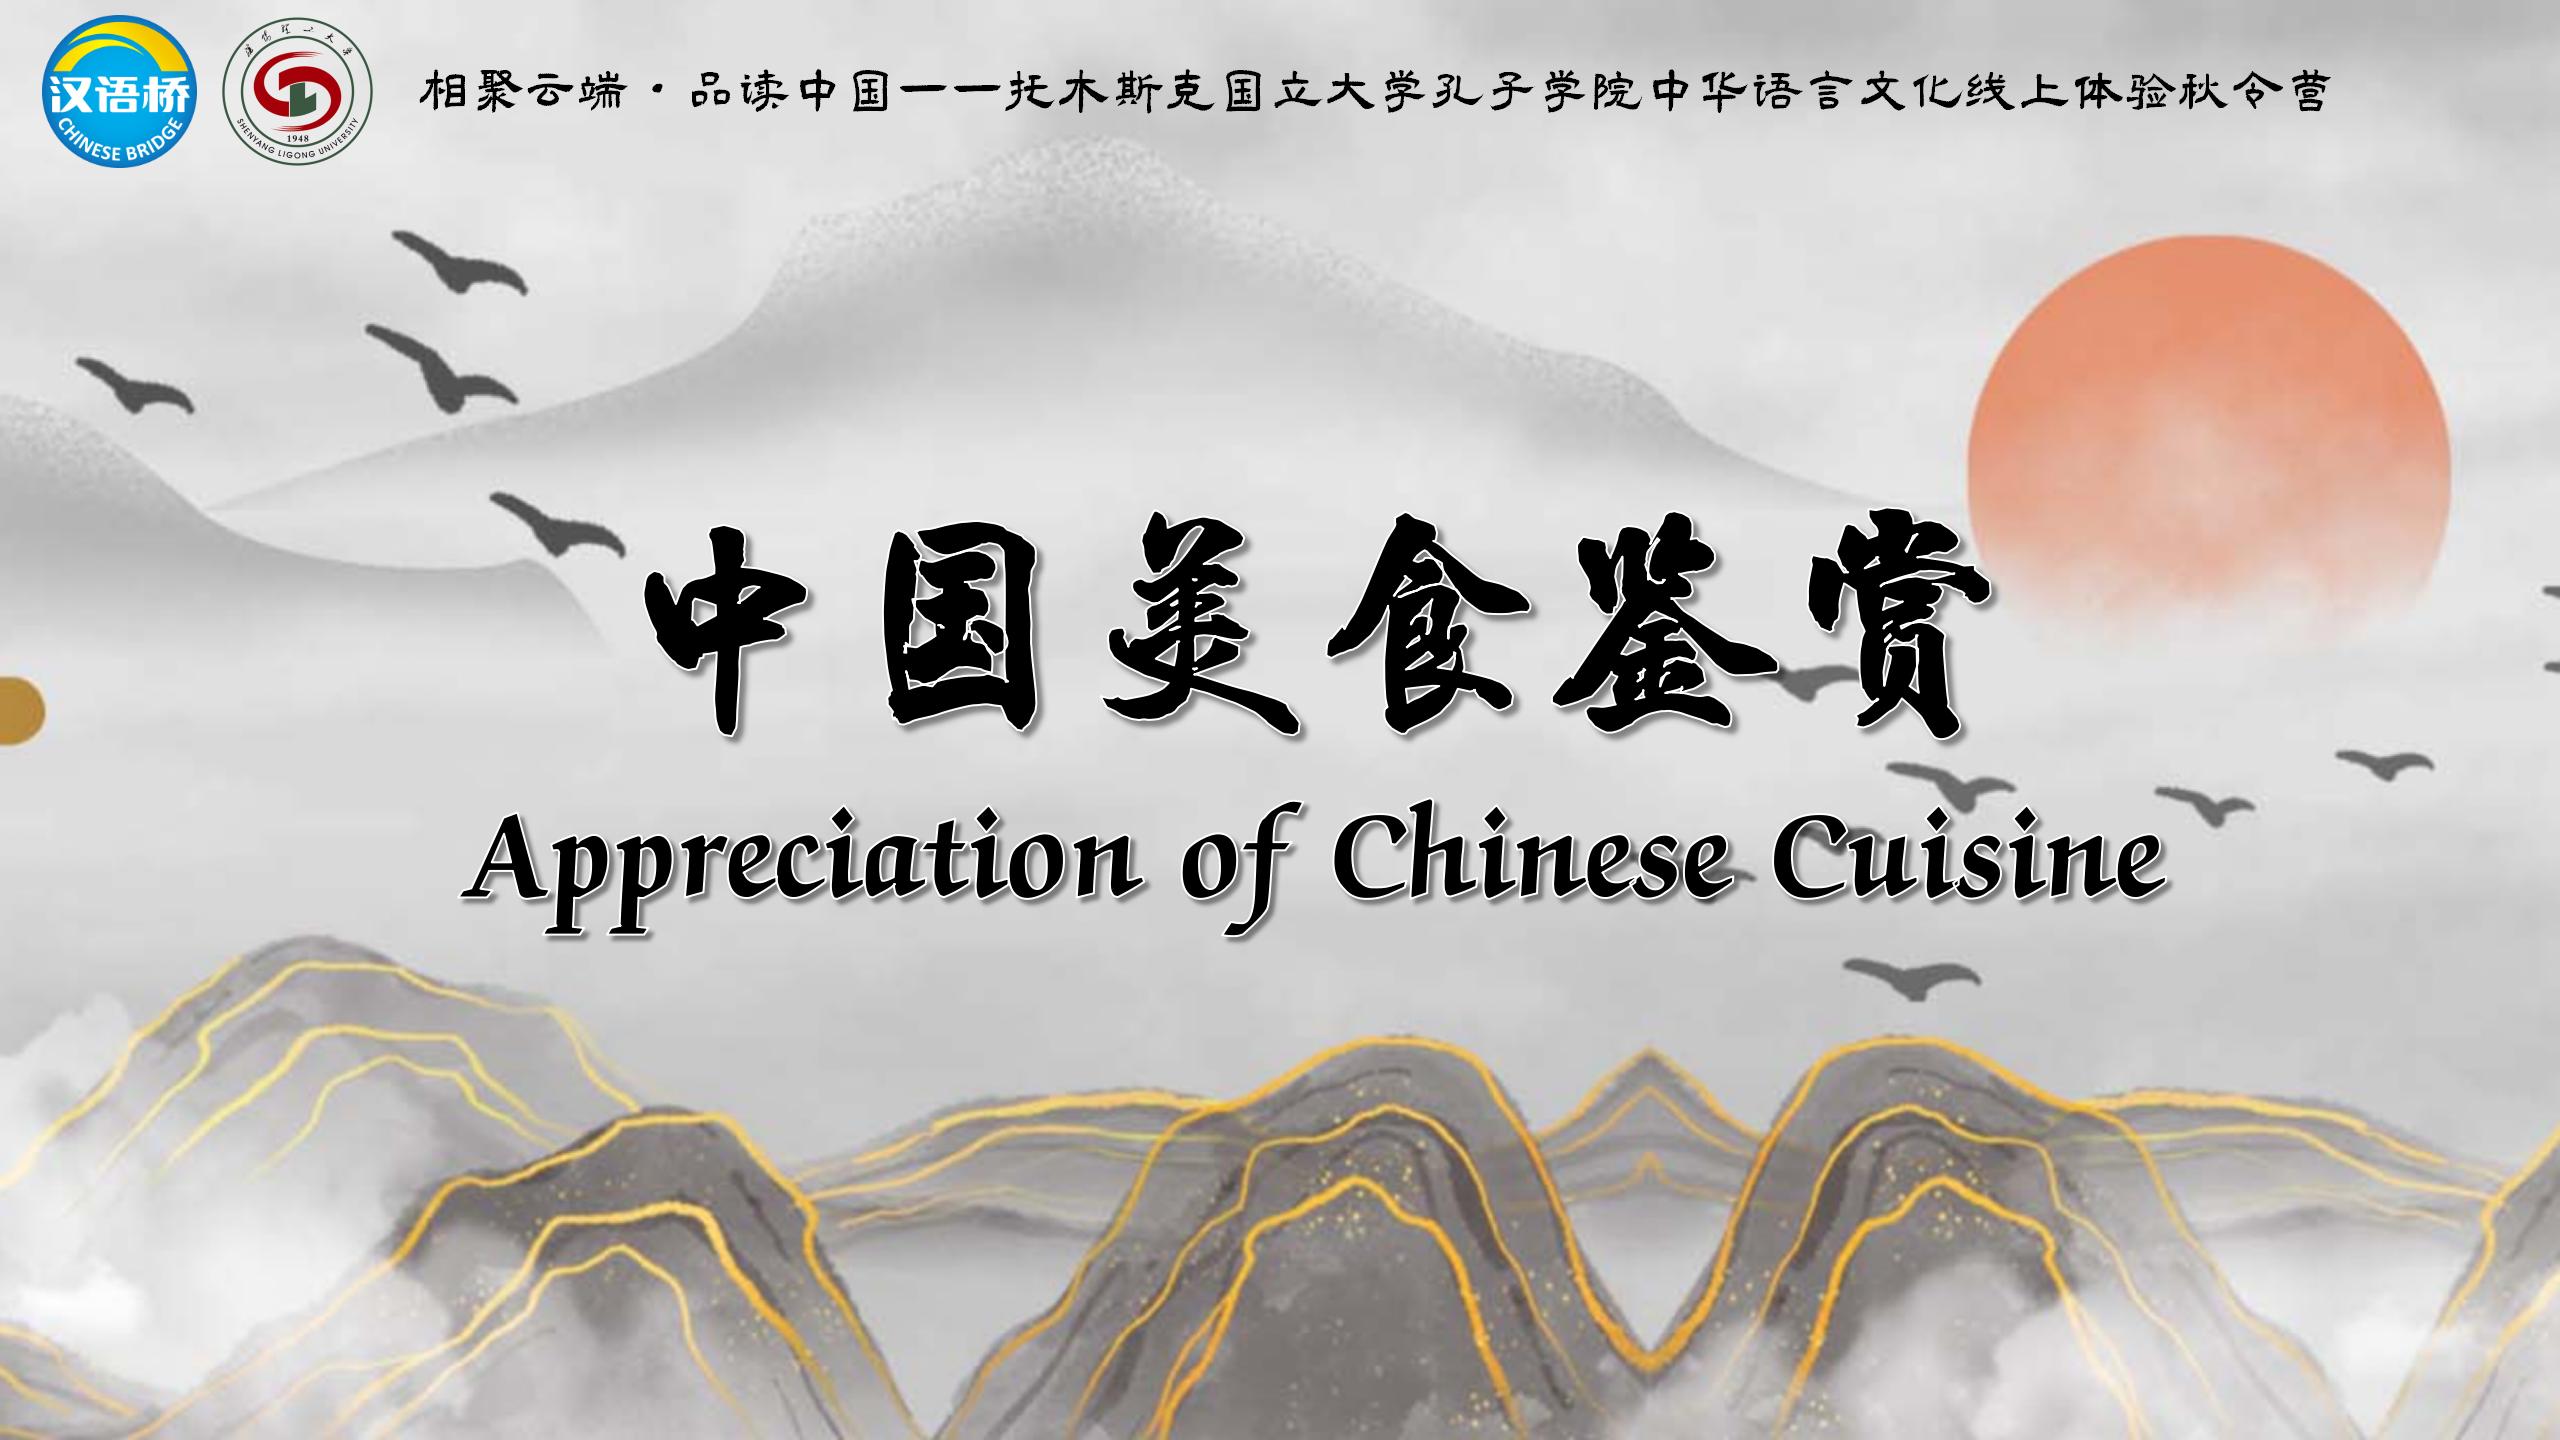 Appreciation of Chinese Cuisine